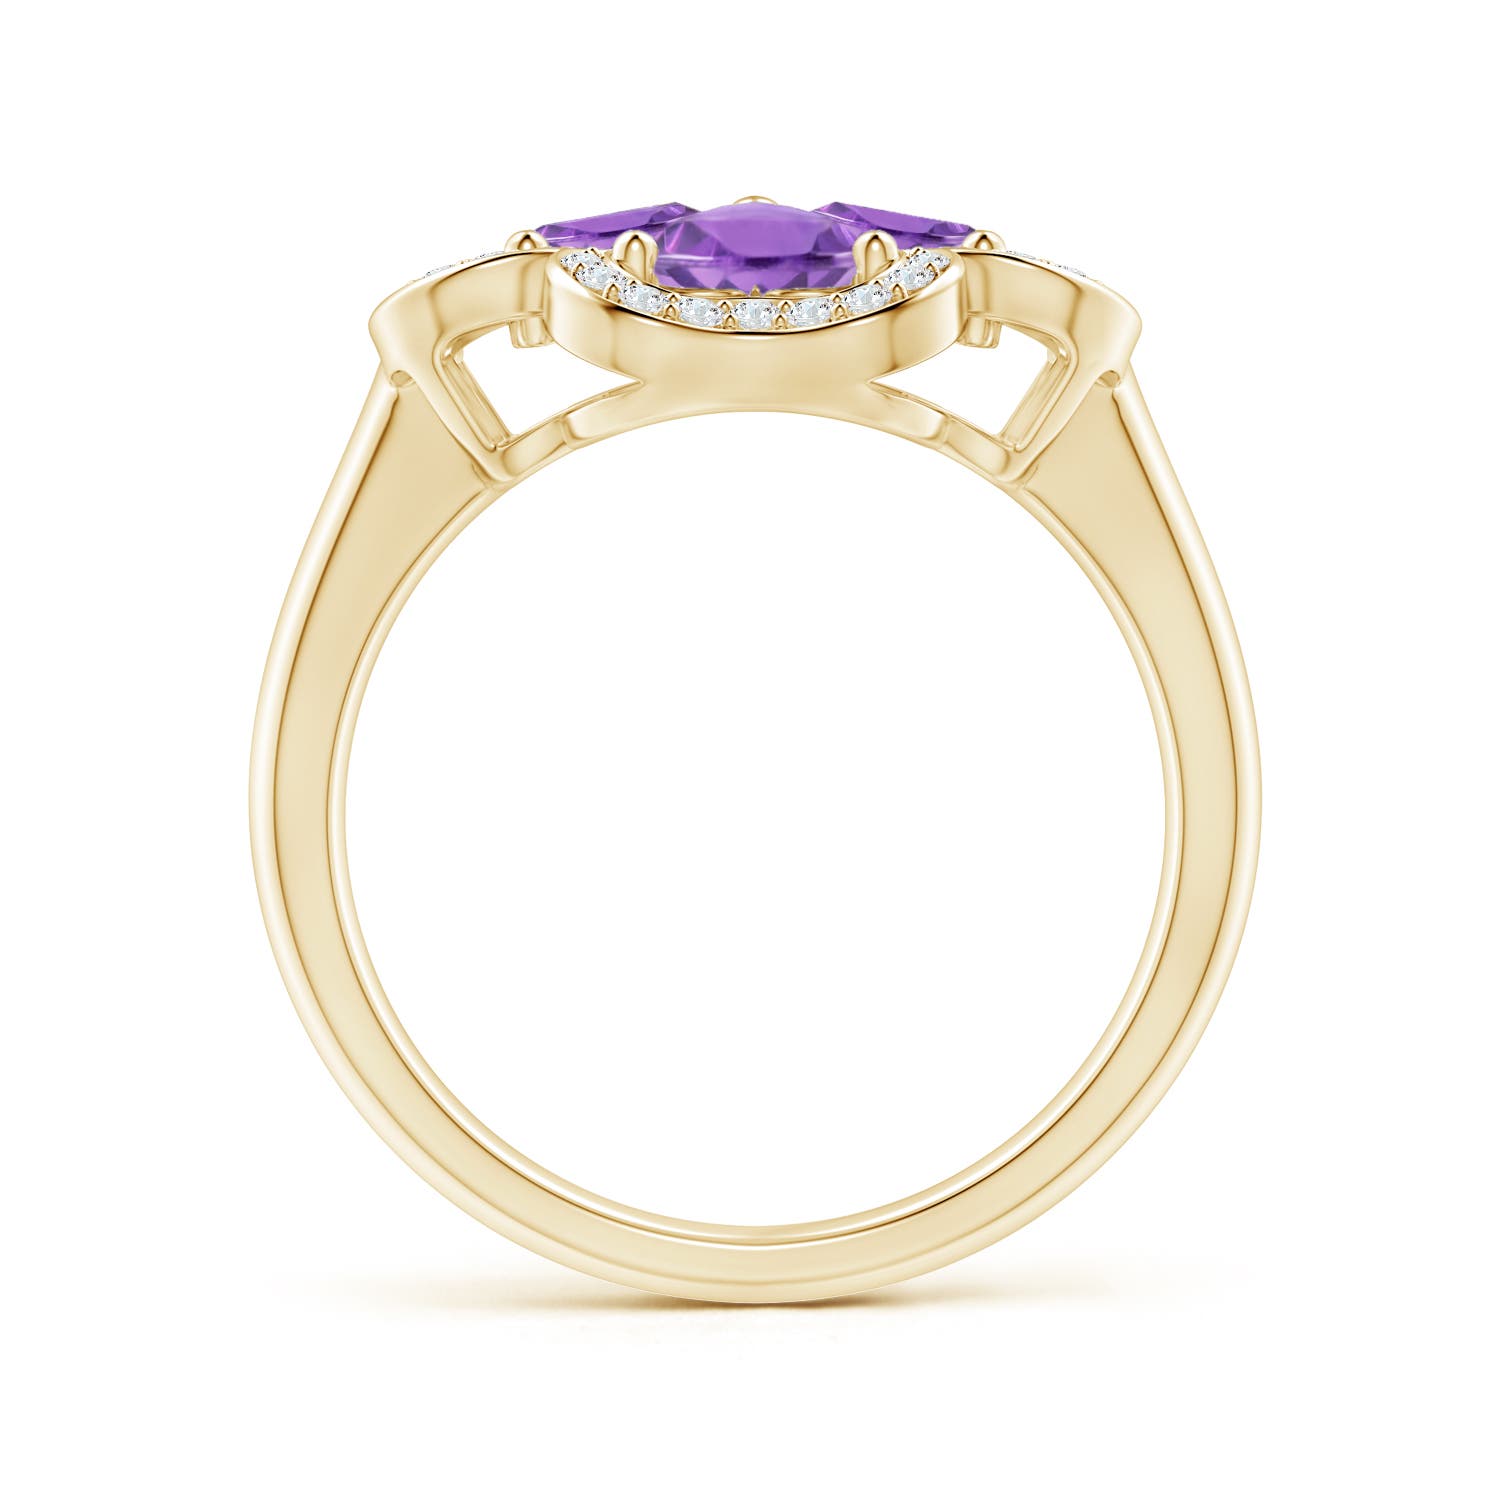 A - Amethyst / 1.57 CT / 14 KT Yellow Gold